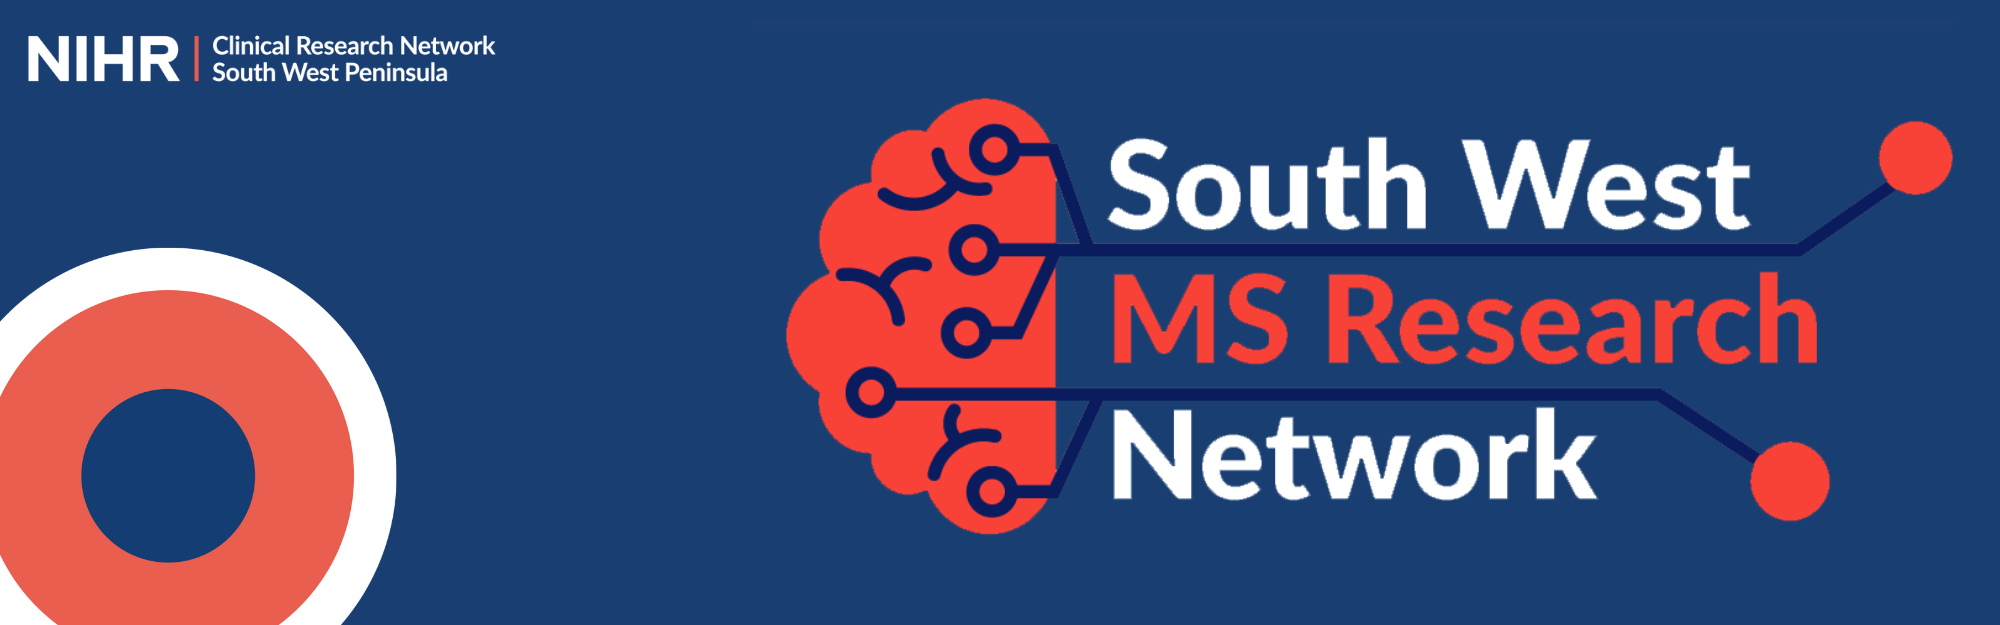 Logos of the NIHR Clinical Research Network South West Peninsula and South West MS Research Network